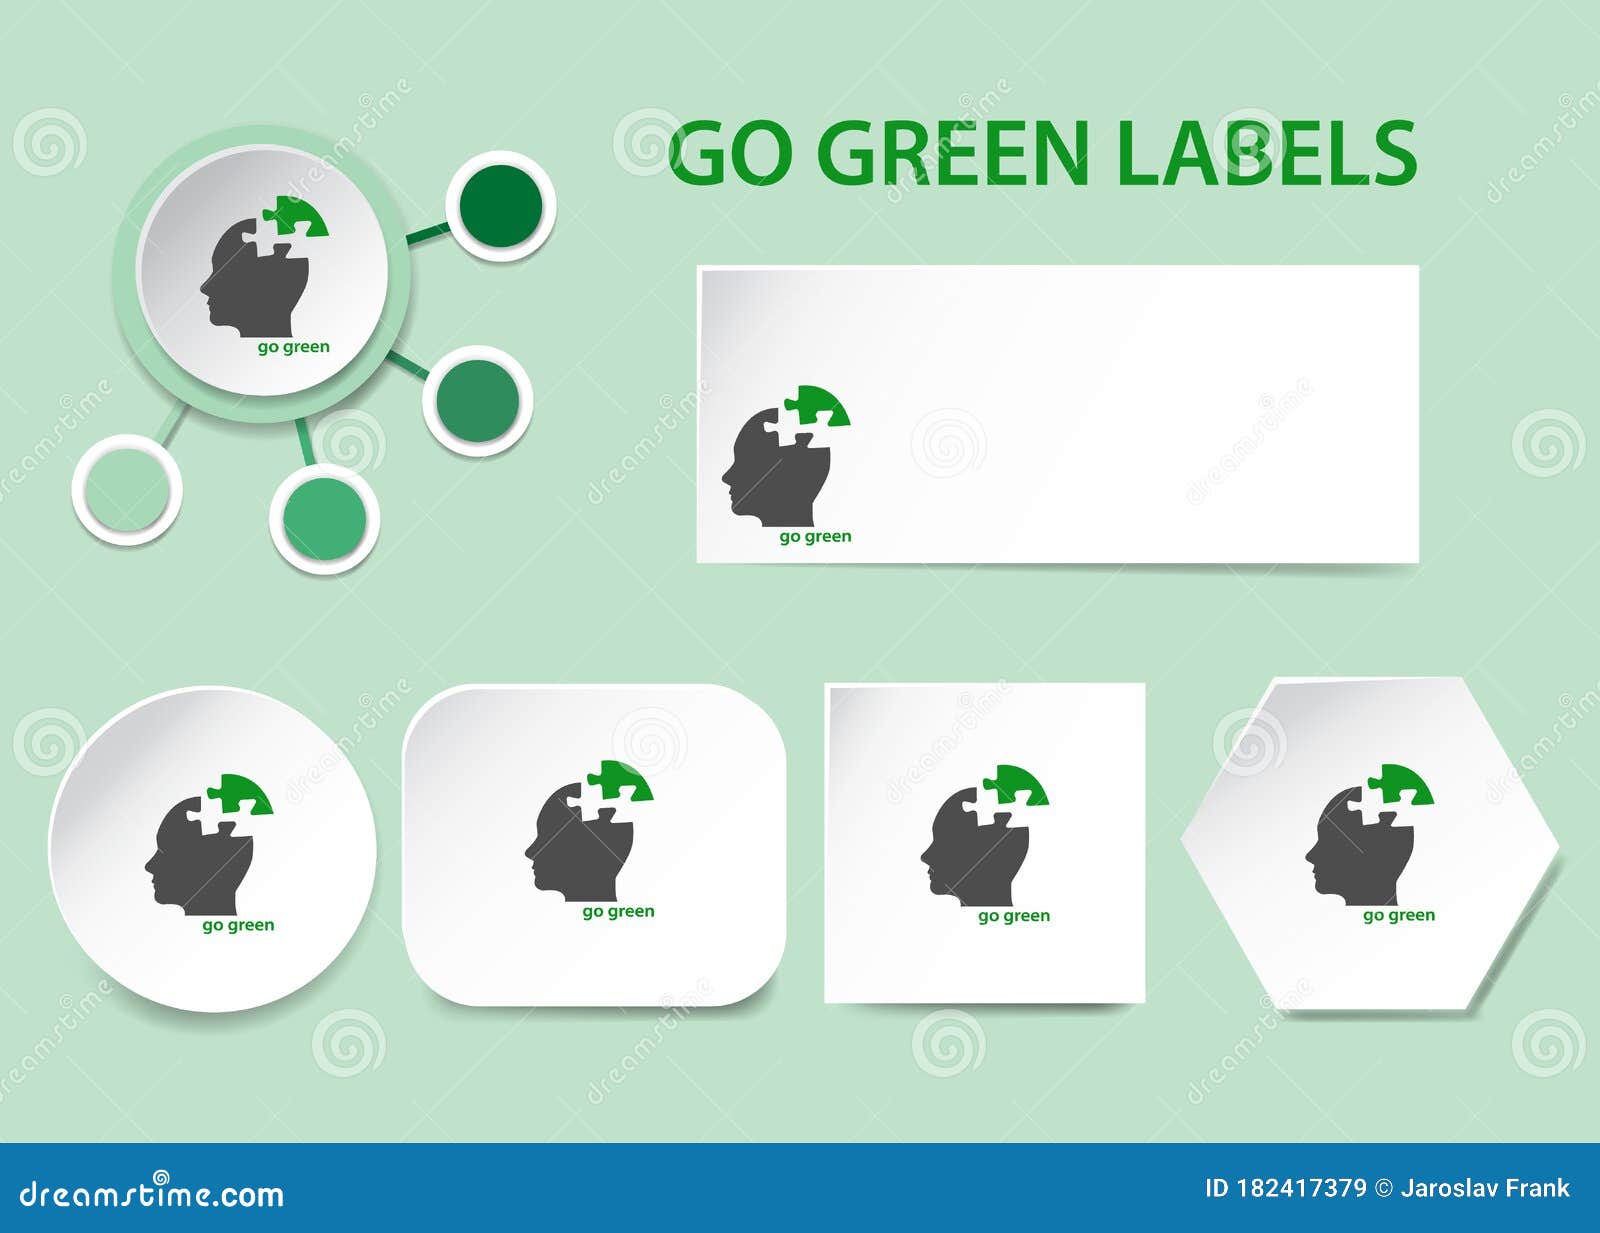 go green business cards 2